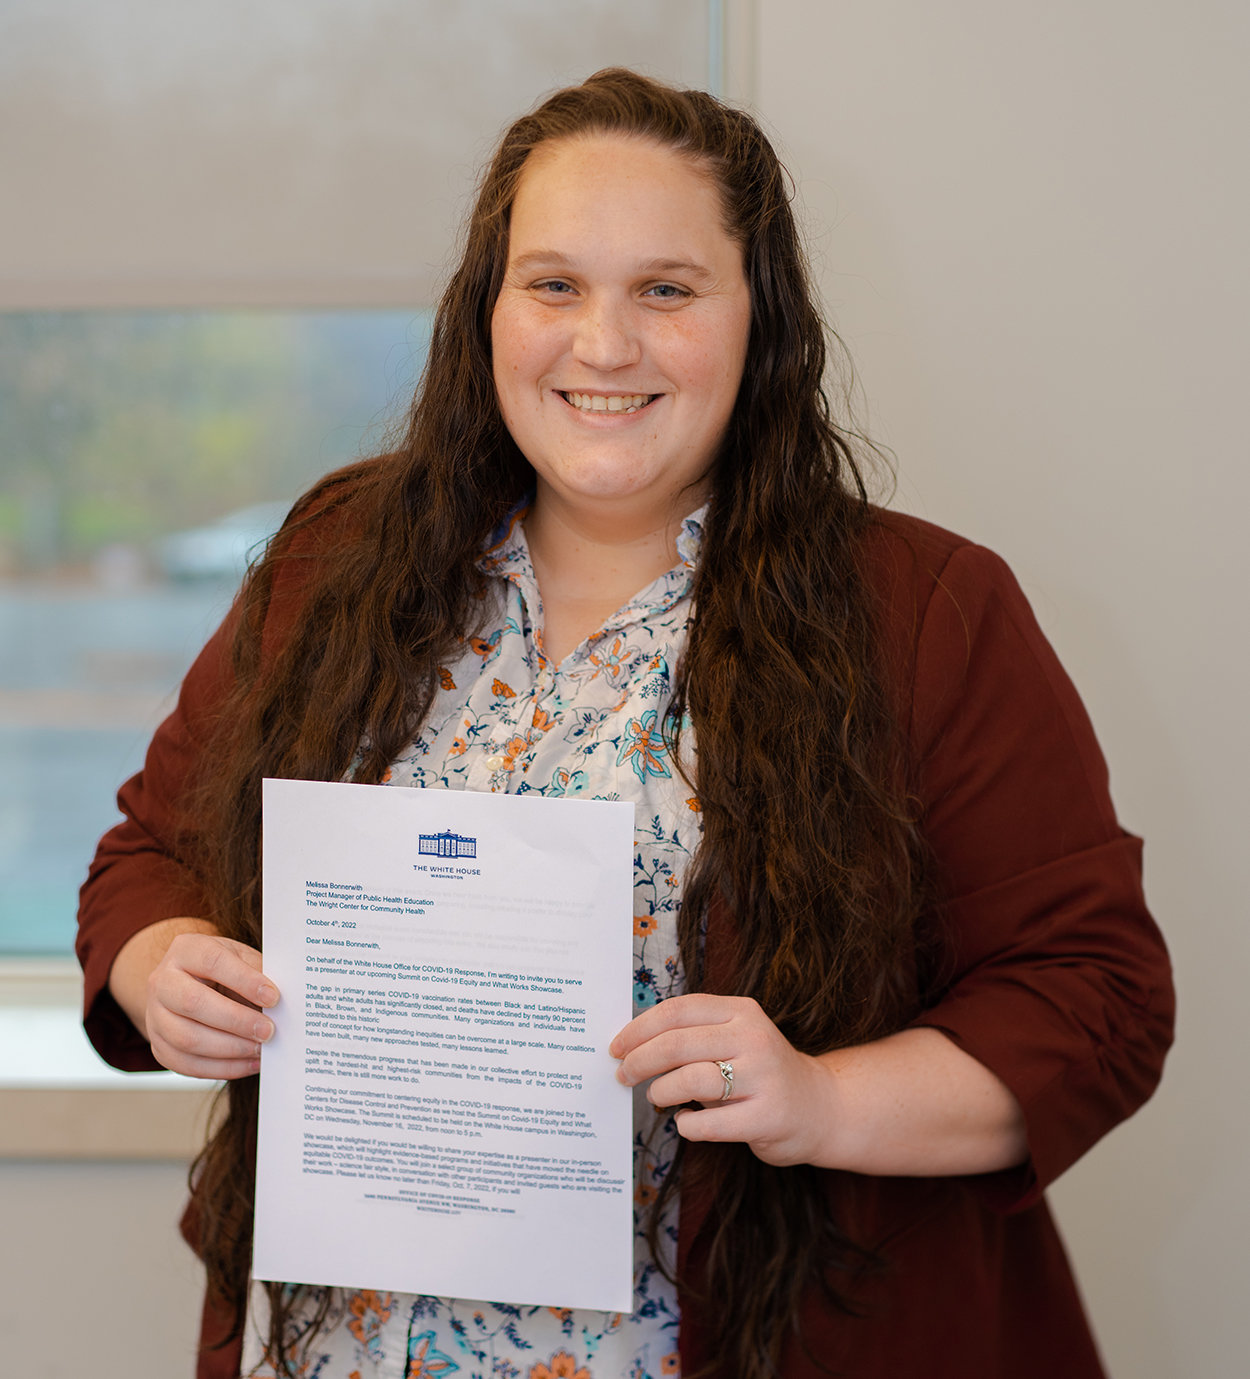 Melissa Bonnerwith, project manager of public health education and AmeriCorps VISTA at the Wright Center, delivered the poster presentation during the Summit on COVID-19 Equity and What Works event at the White House Eisenhower executive office building...